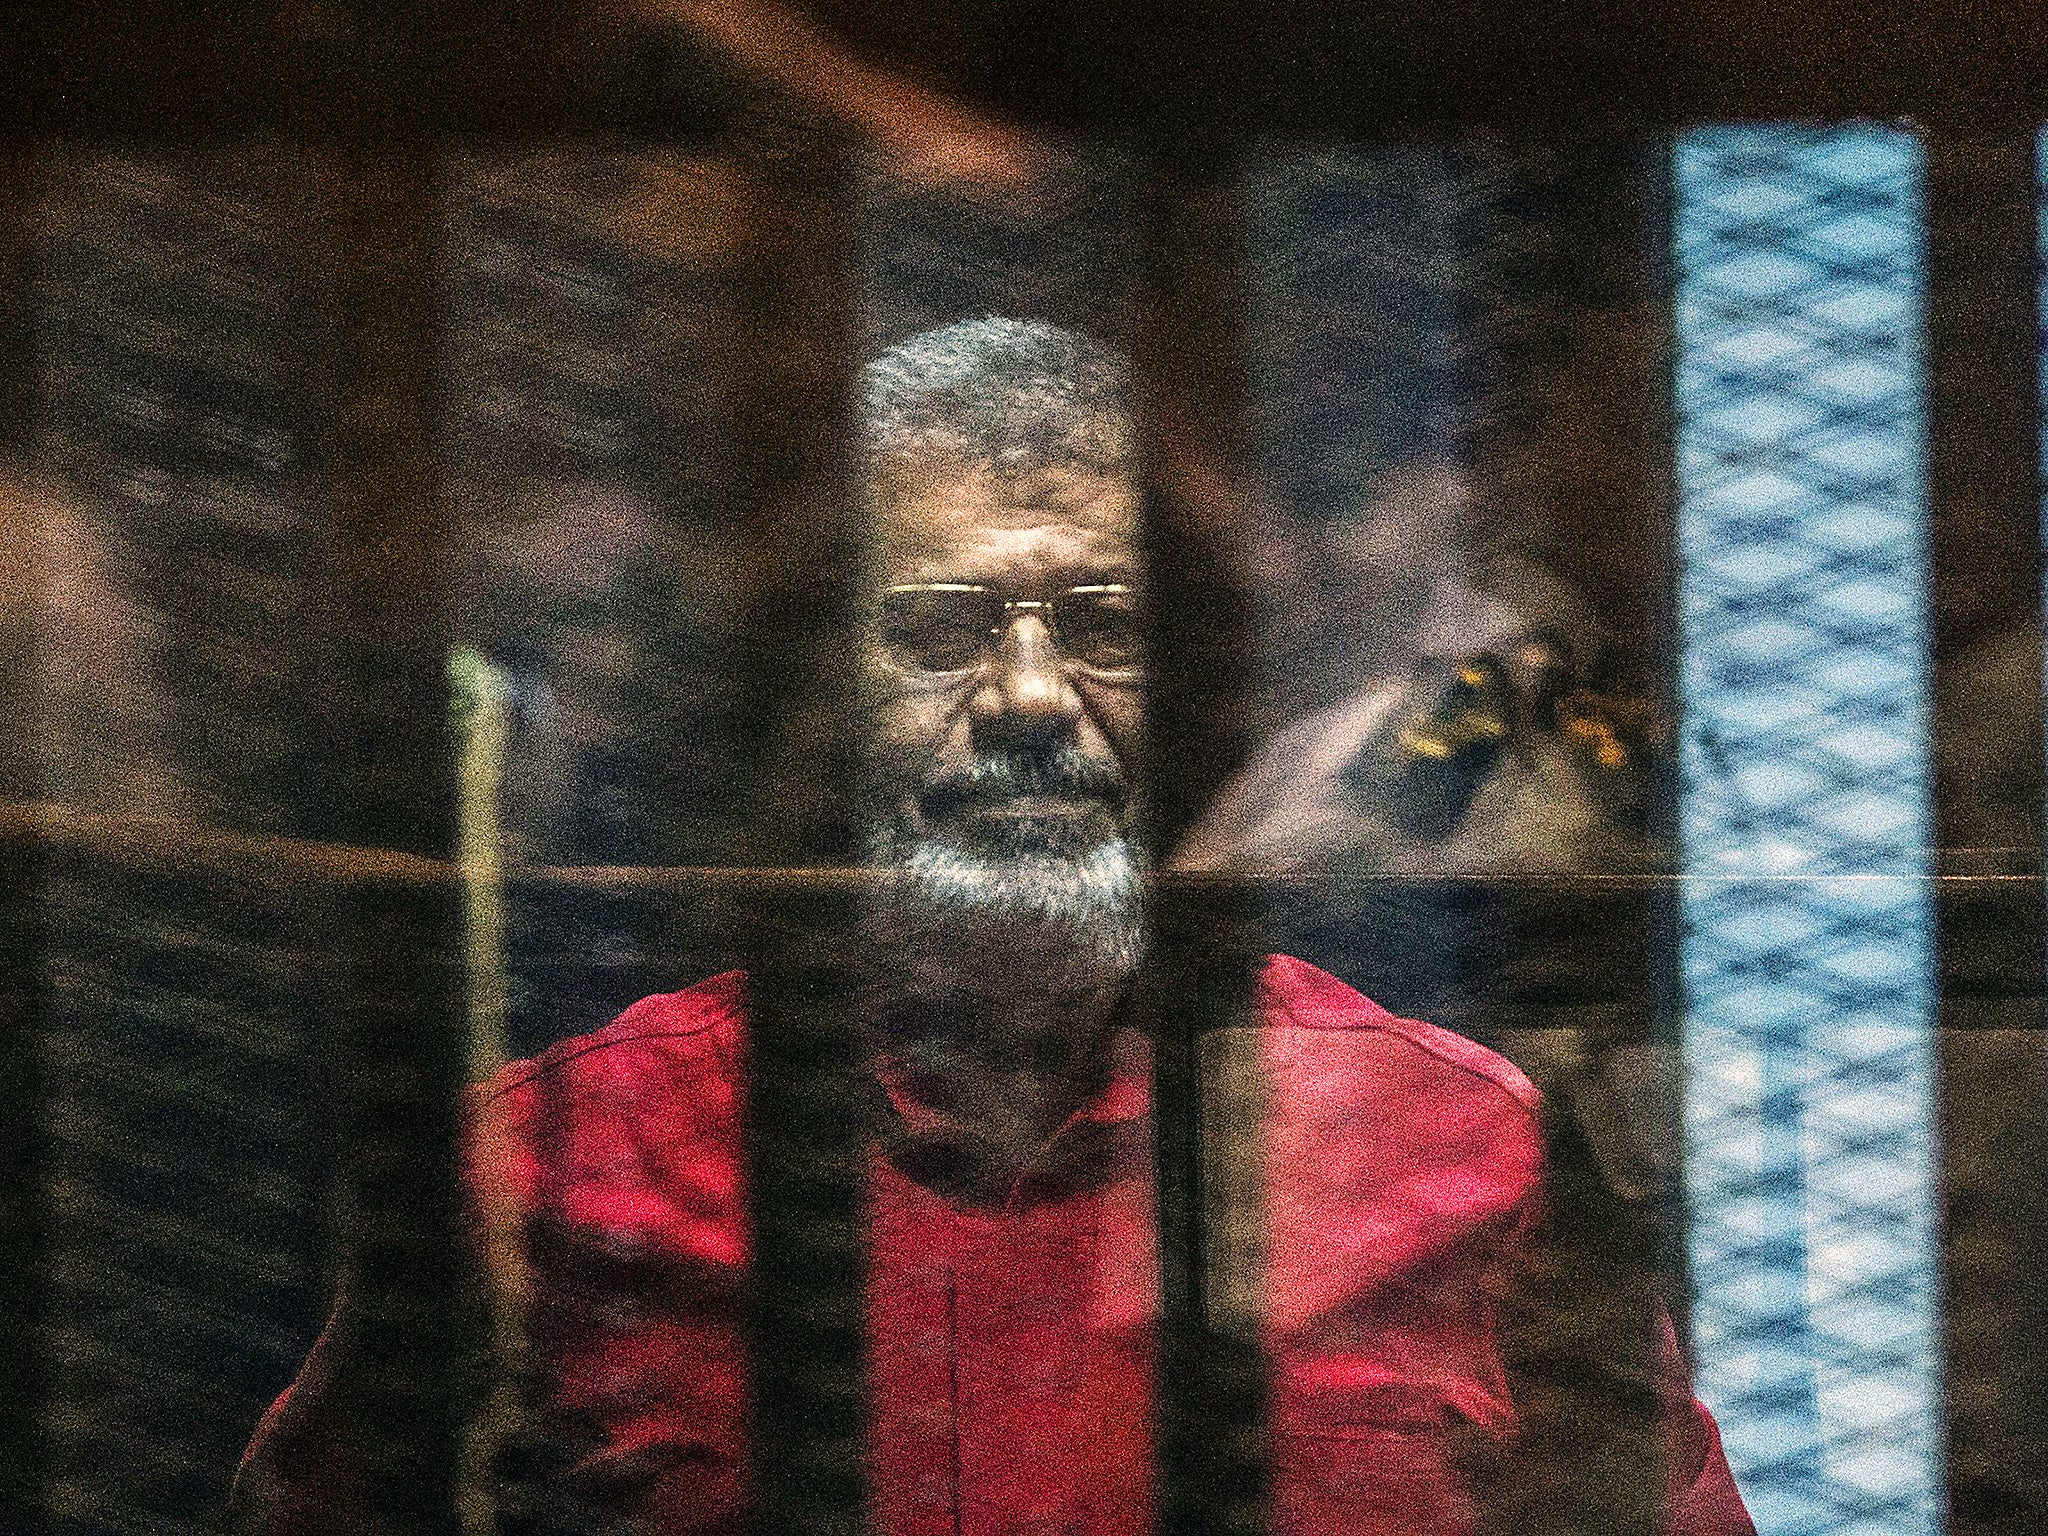 Mohamed Morsi’s removal in 2013 was celebrated by most Coptic Christians in Egypt